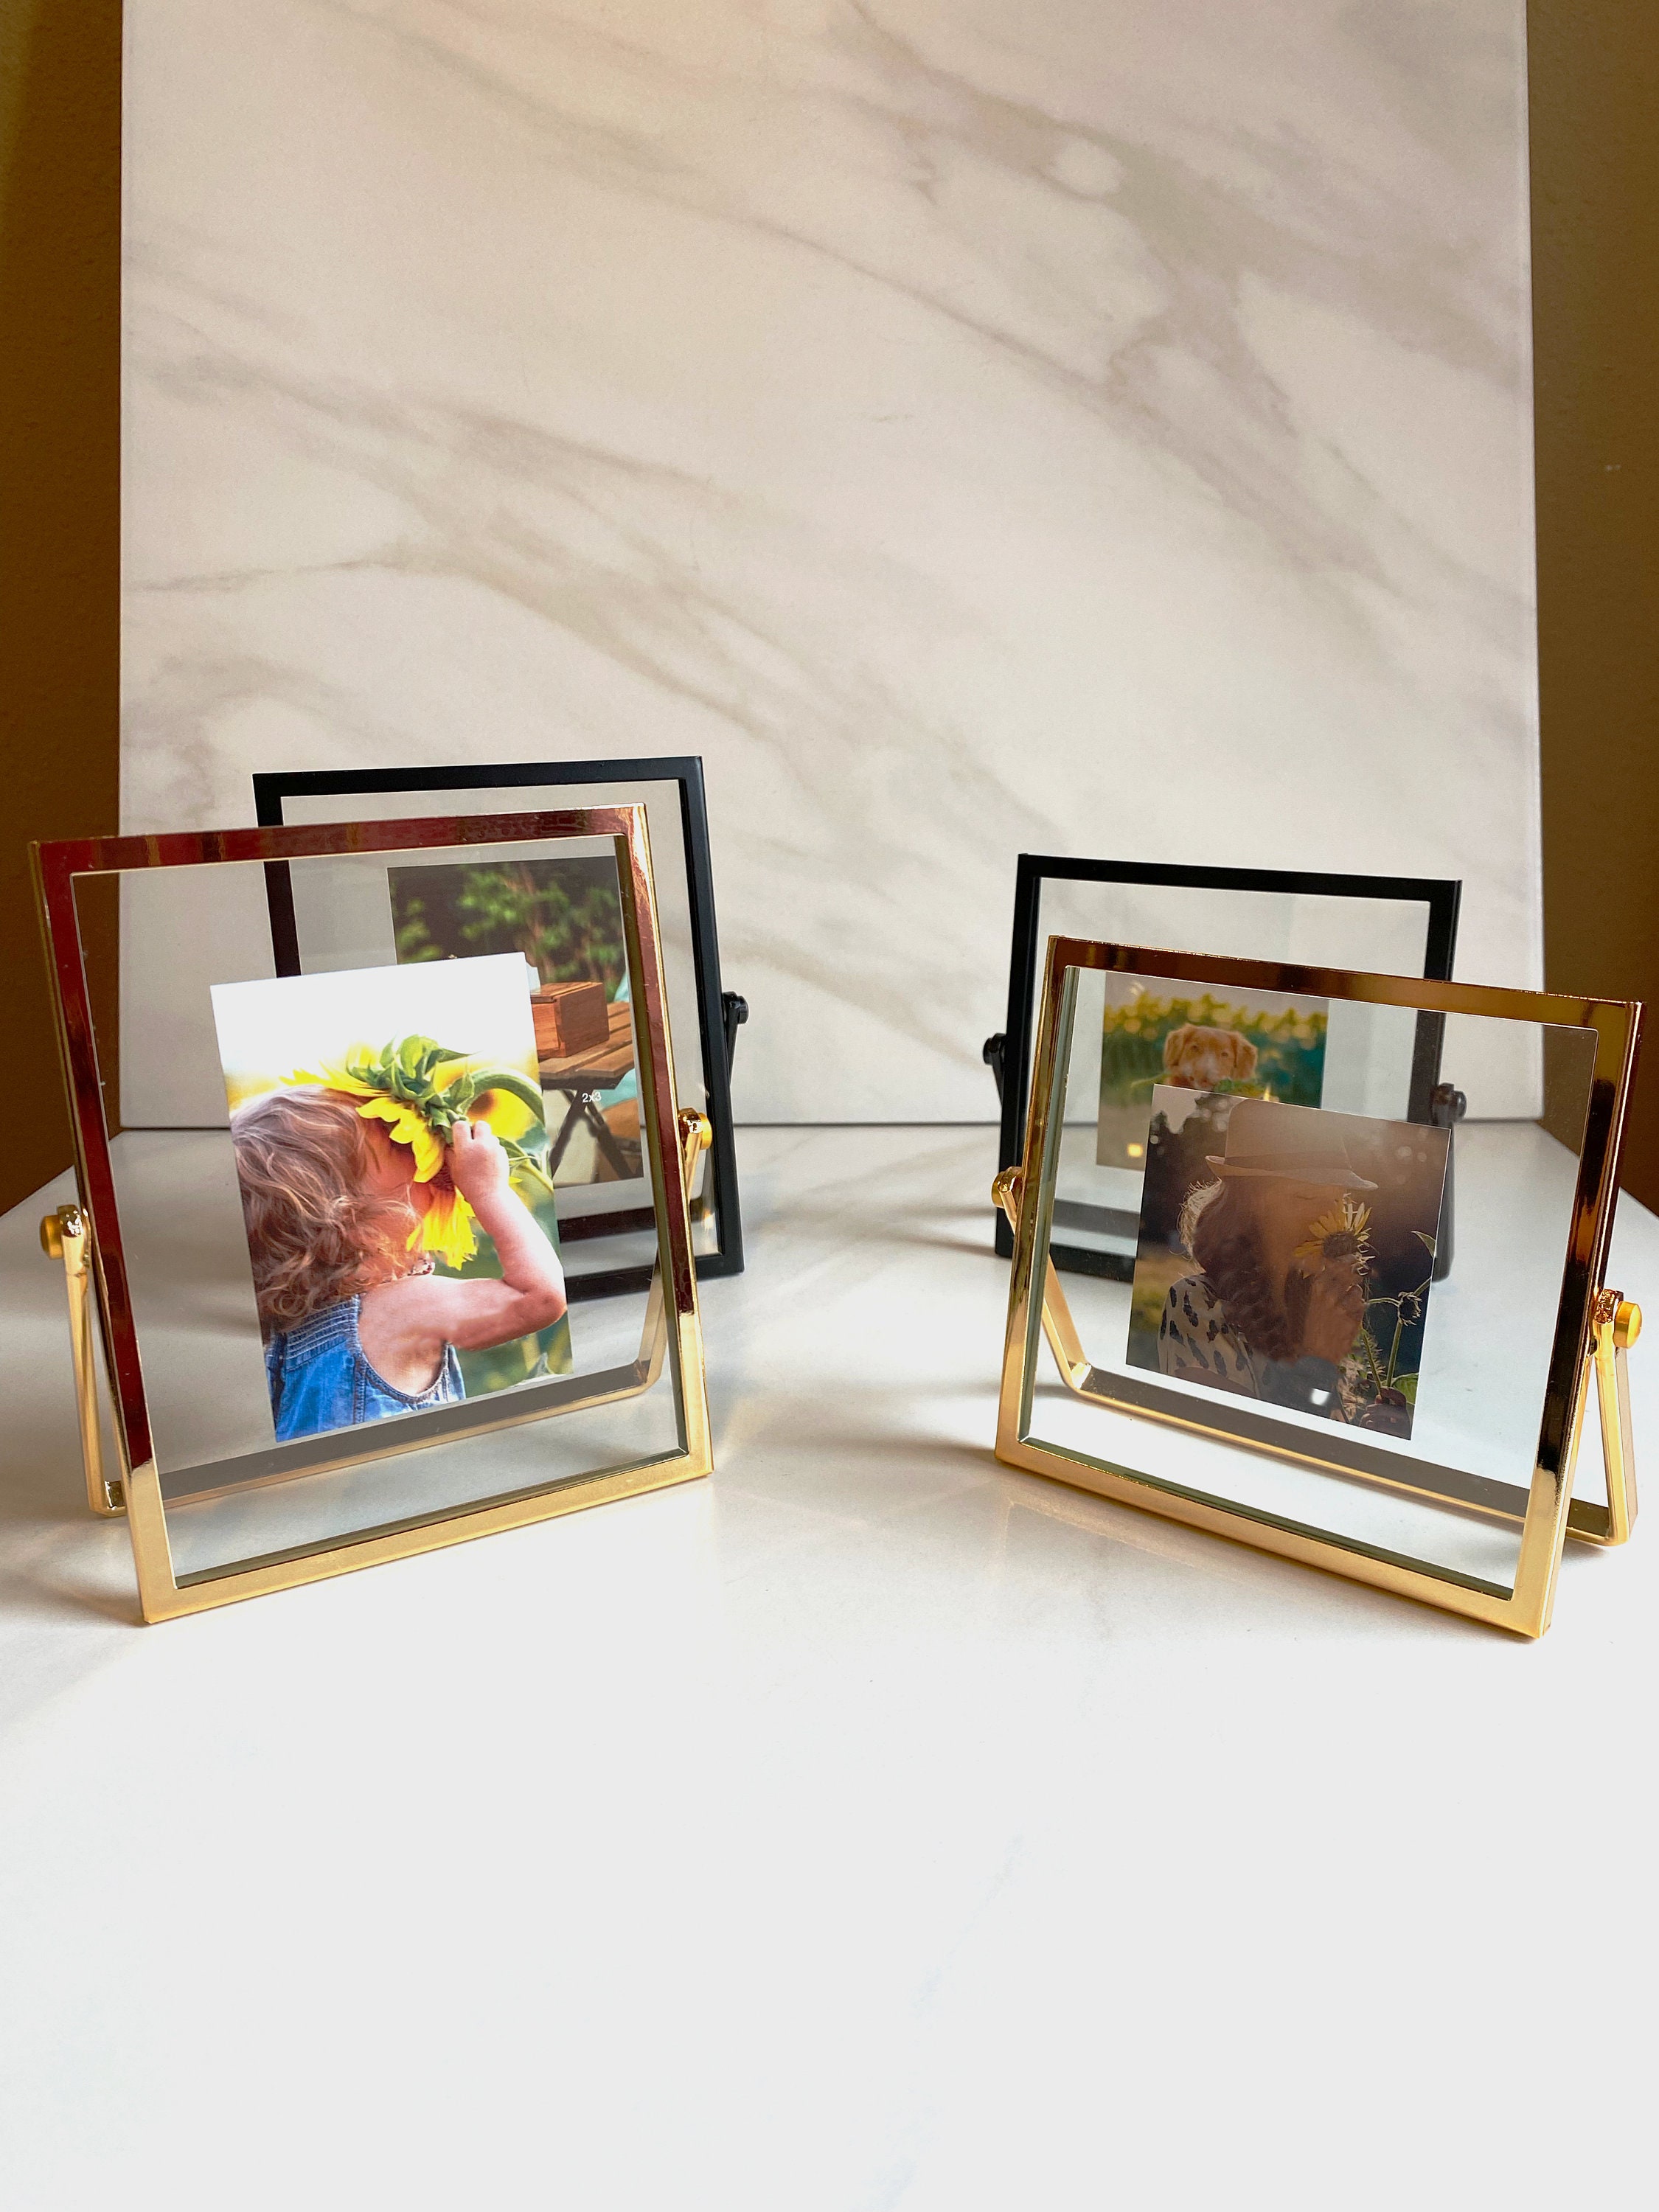 2x 4x6 Picture Frame for Art Black Photo Frames Wall Hanging